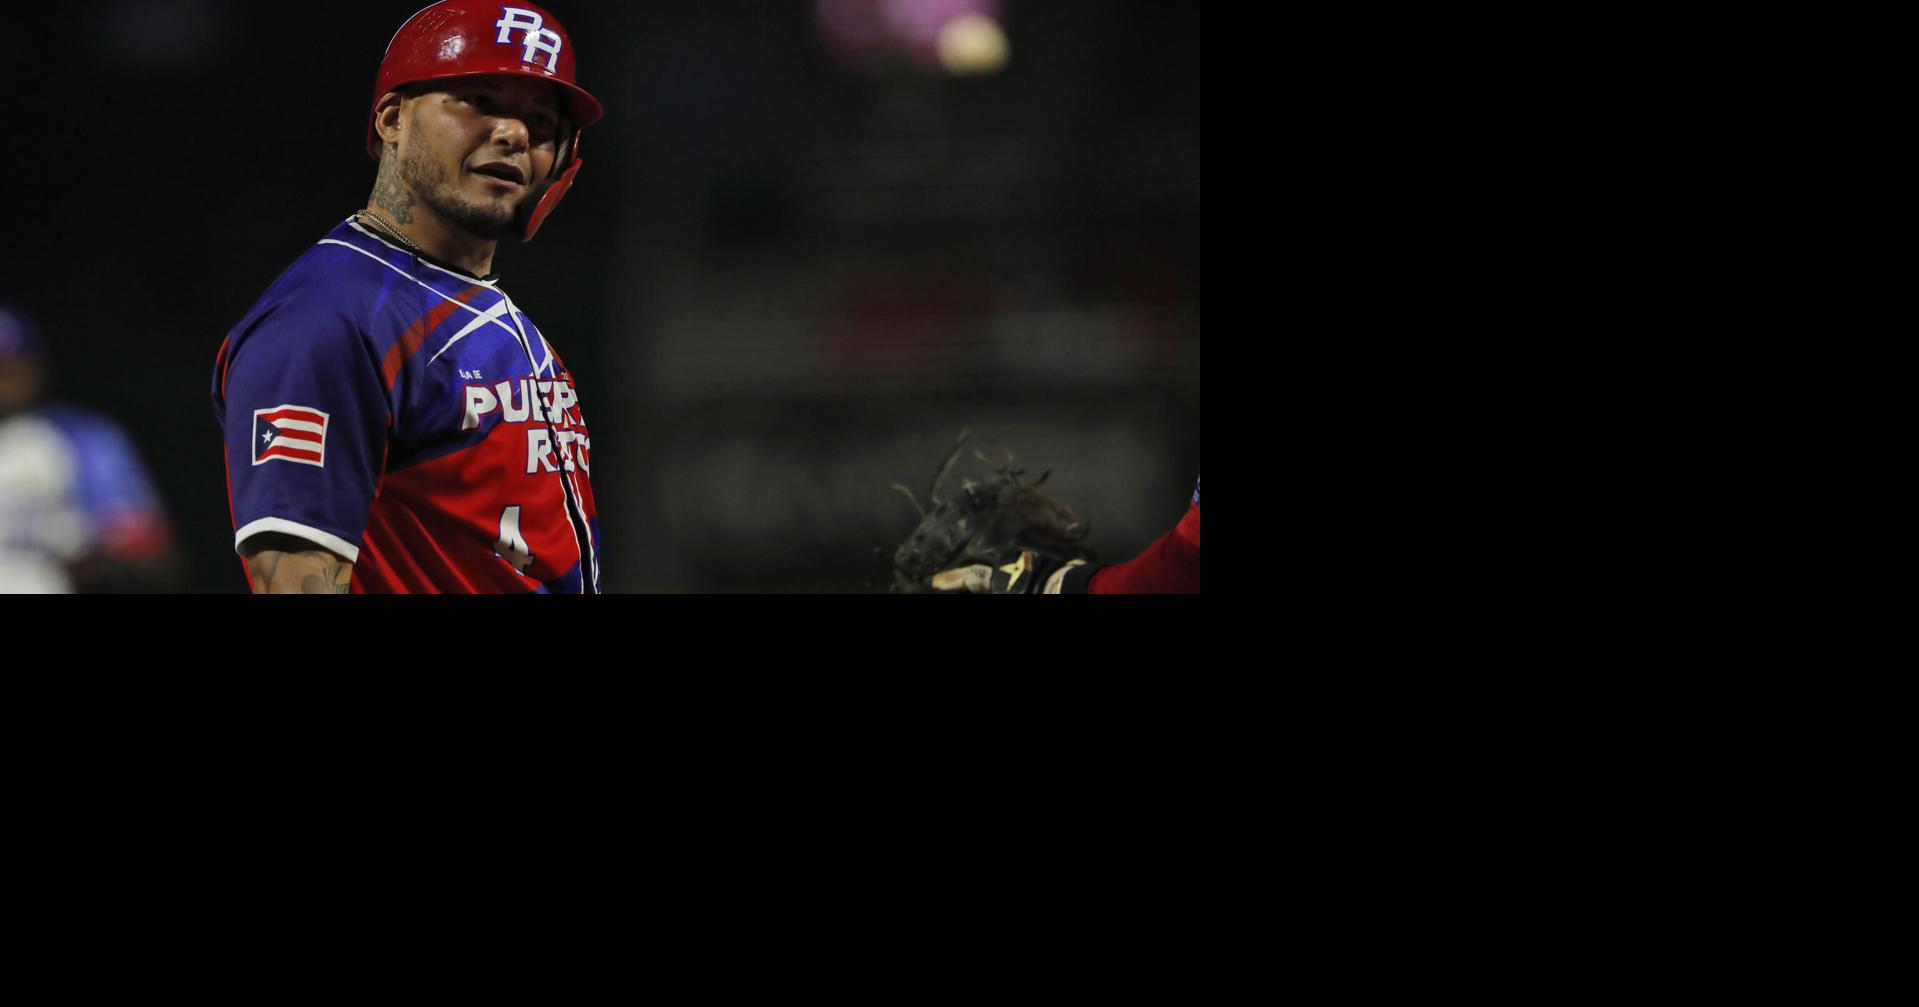 Former Cardinals standout Molina settling in as a manager, guiding Puerto  Rico in World tourney